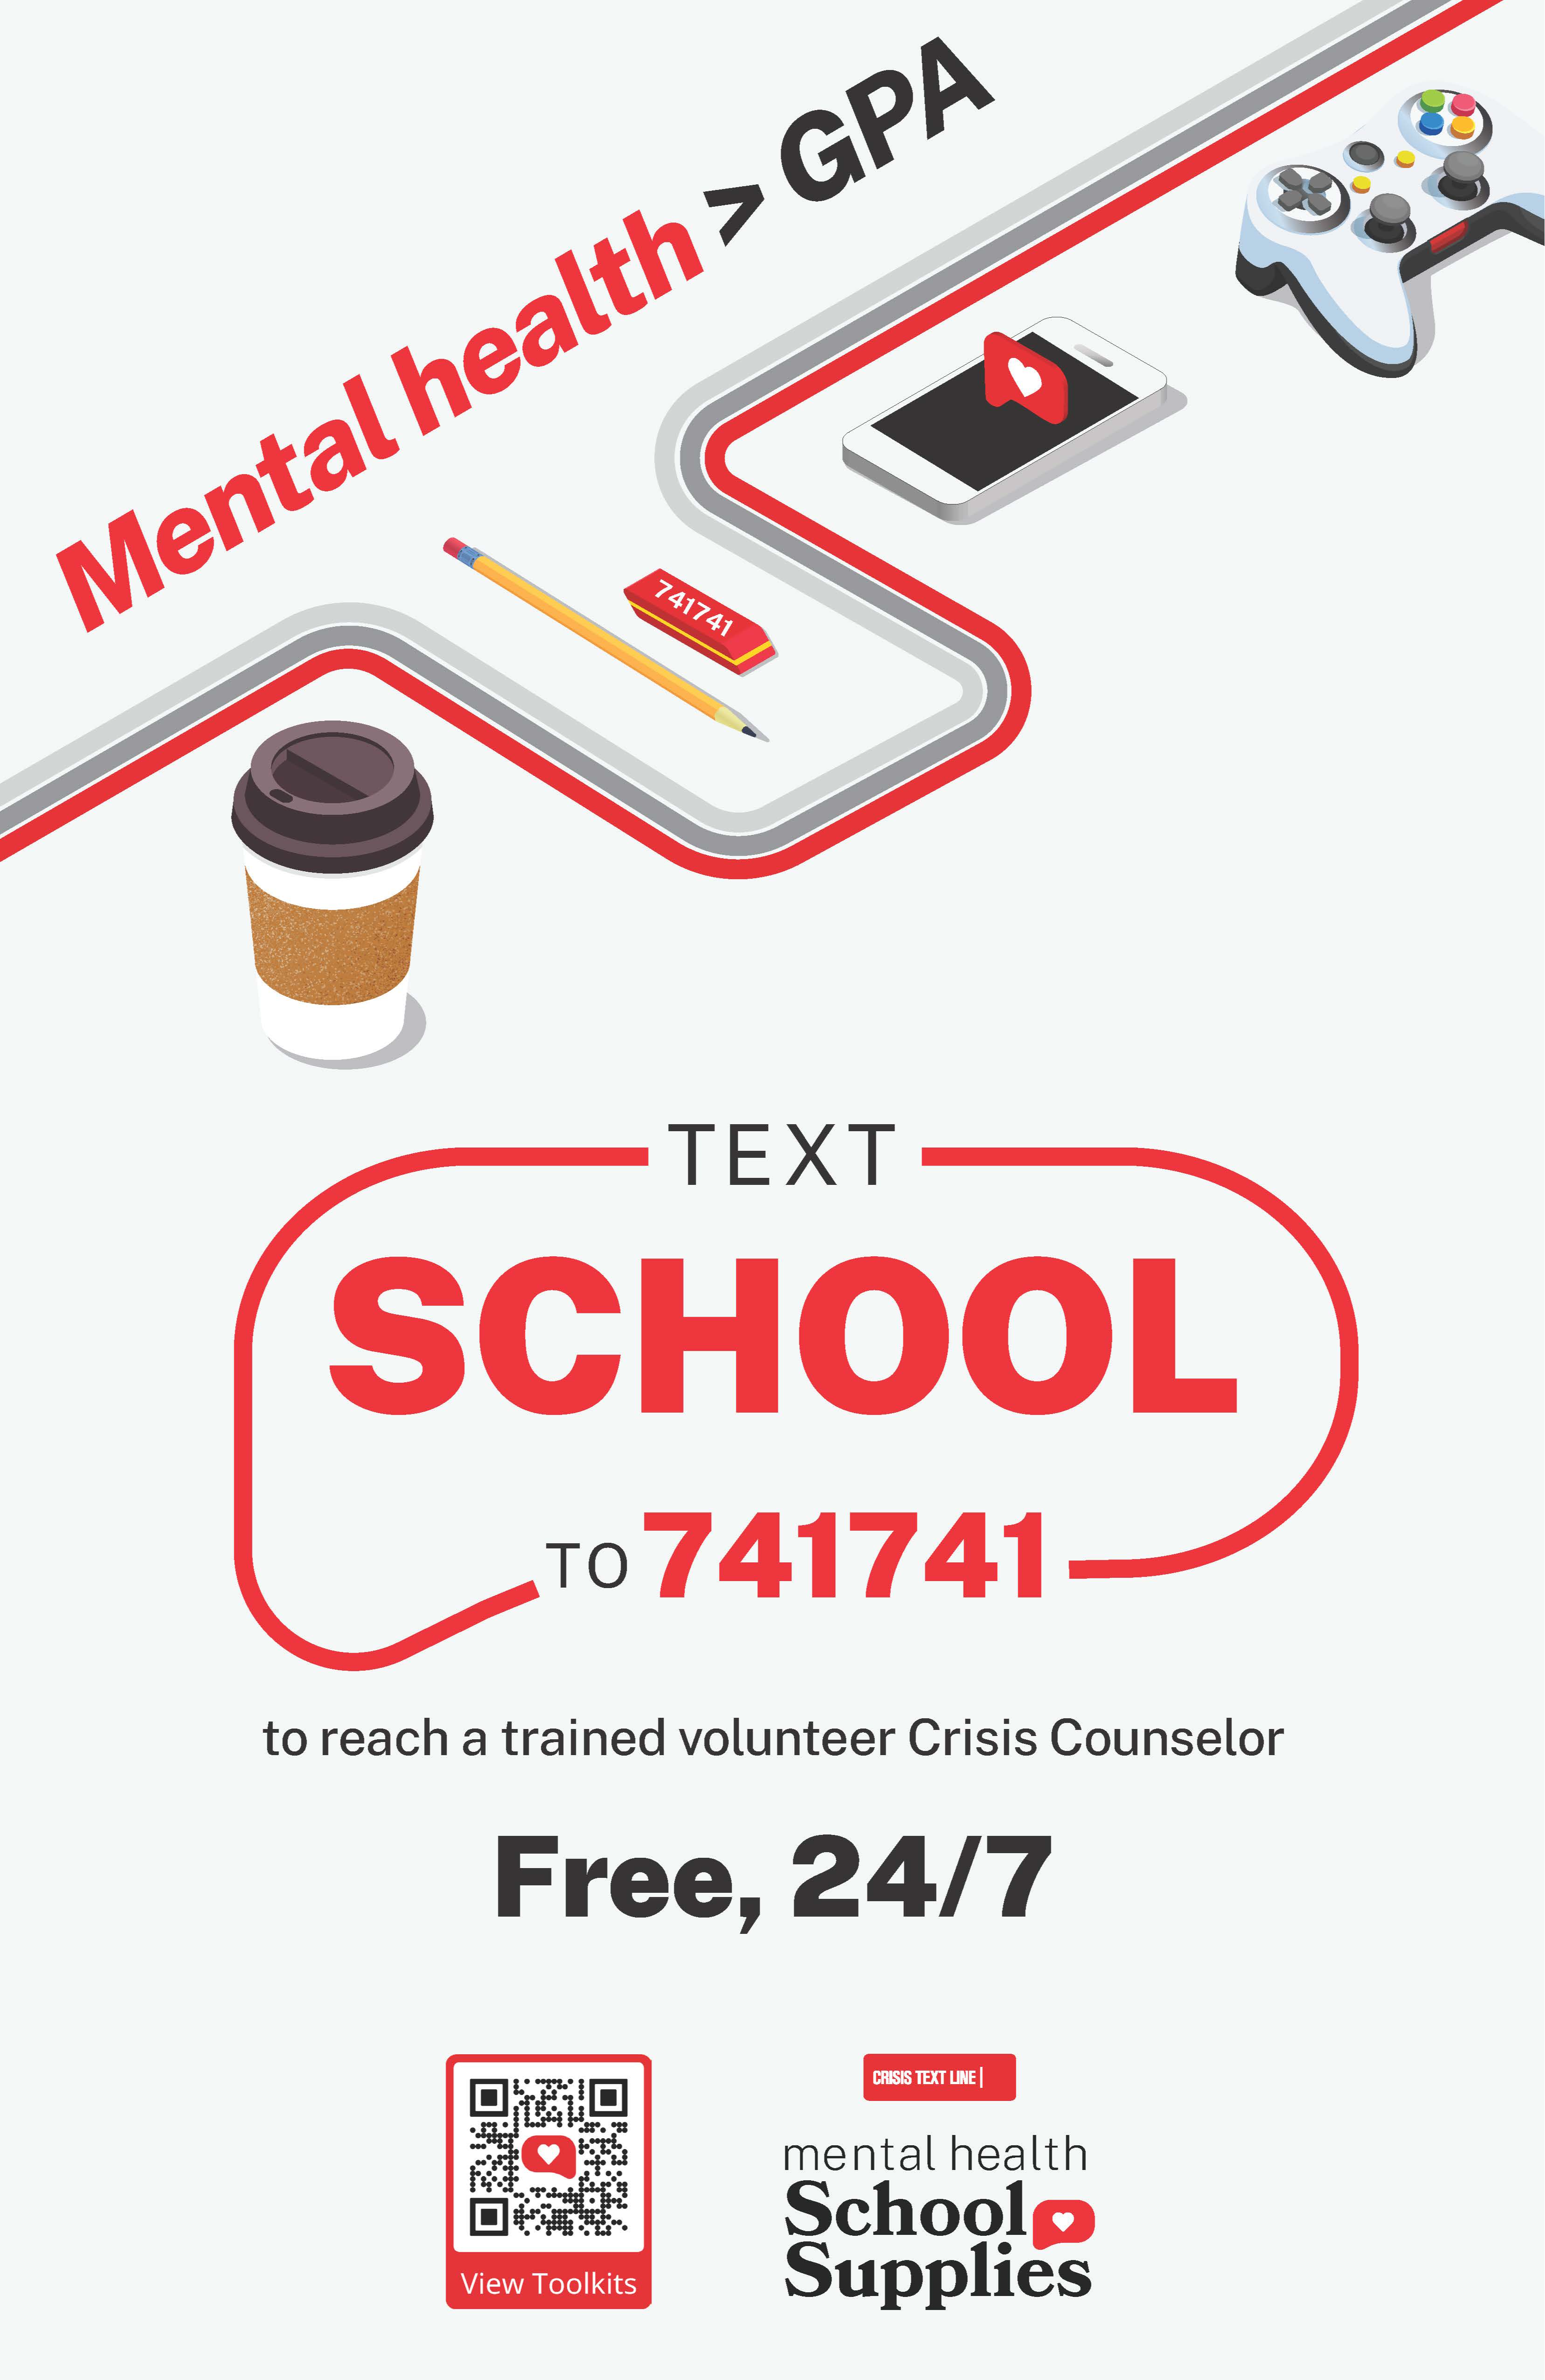 Mental heatlh > GPA Text school to 741741 to reach a trained volunteer crisis counselor free, 24/7